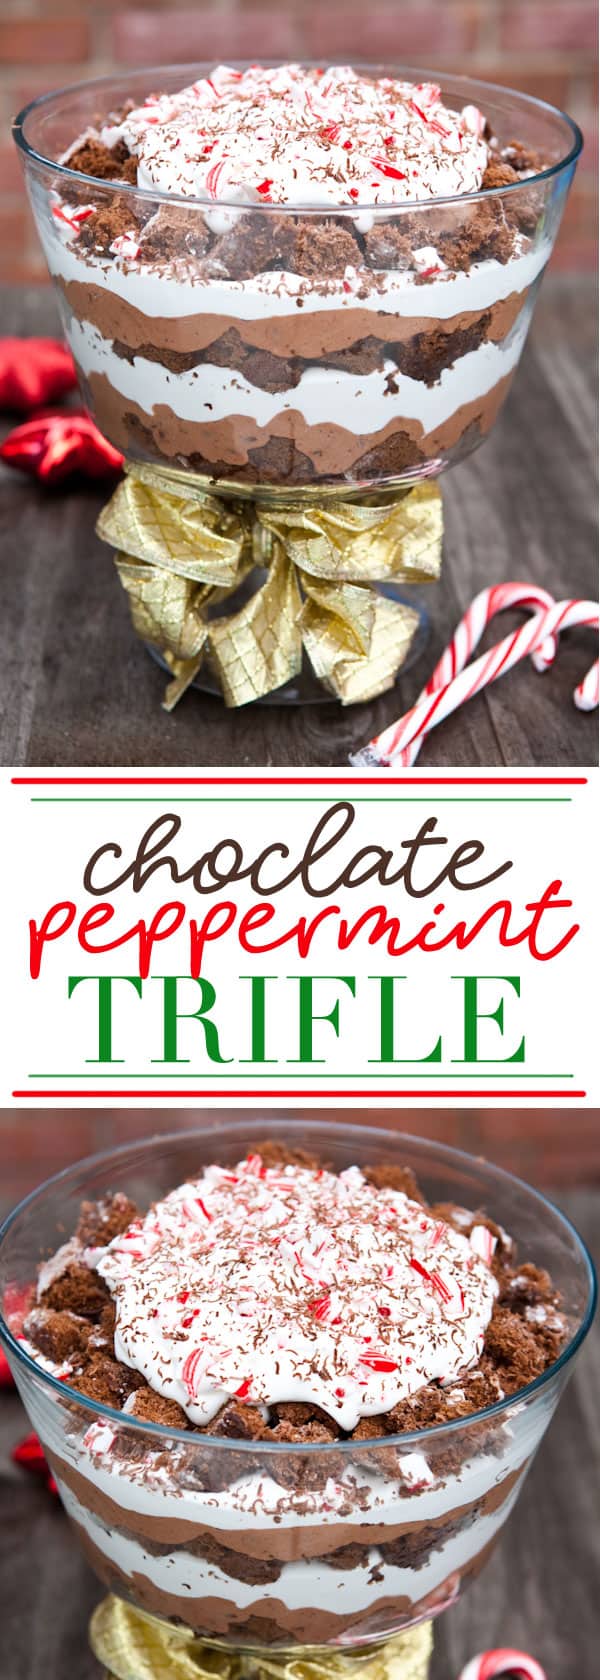 Chocolate Peppermint Trifle #chocolate #christmas #holiday #peppermint #trifle